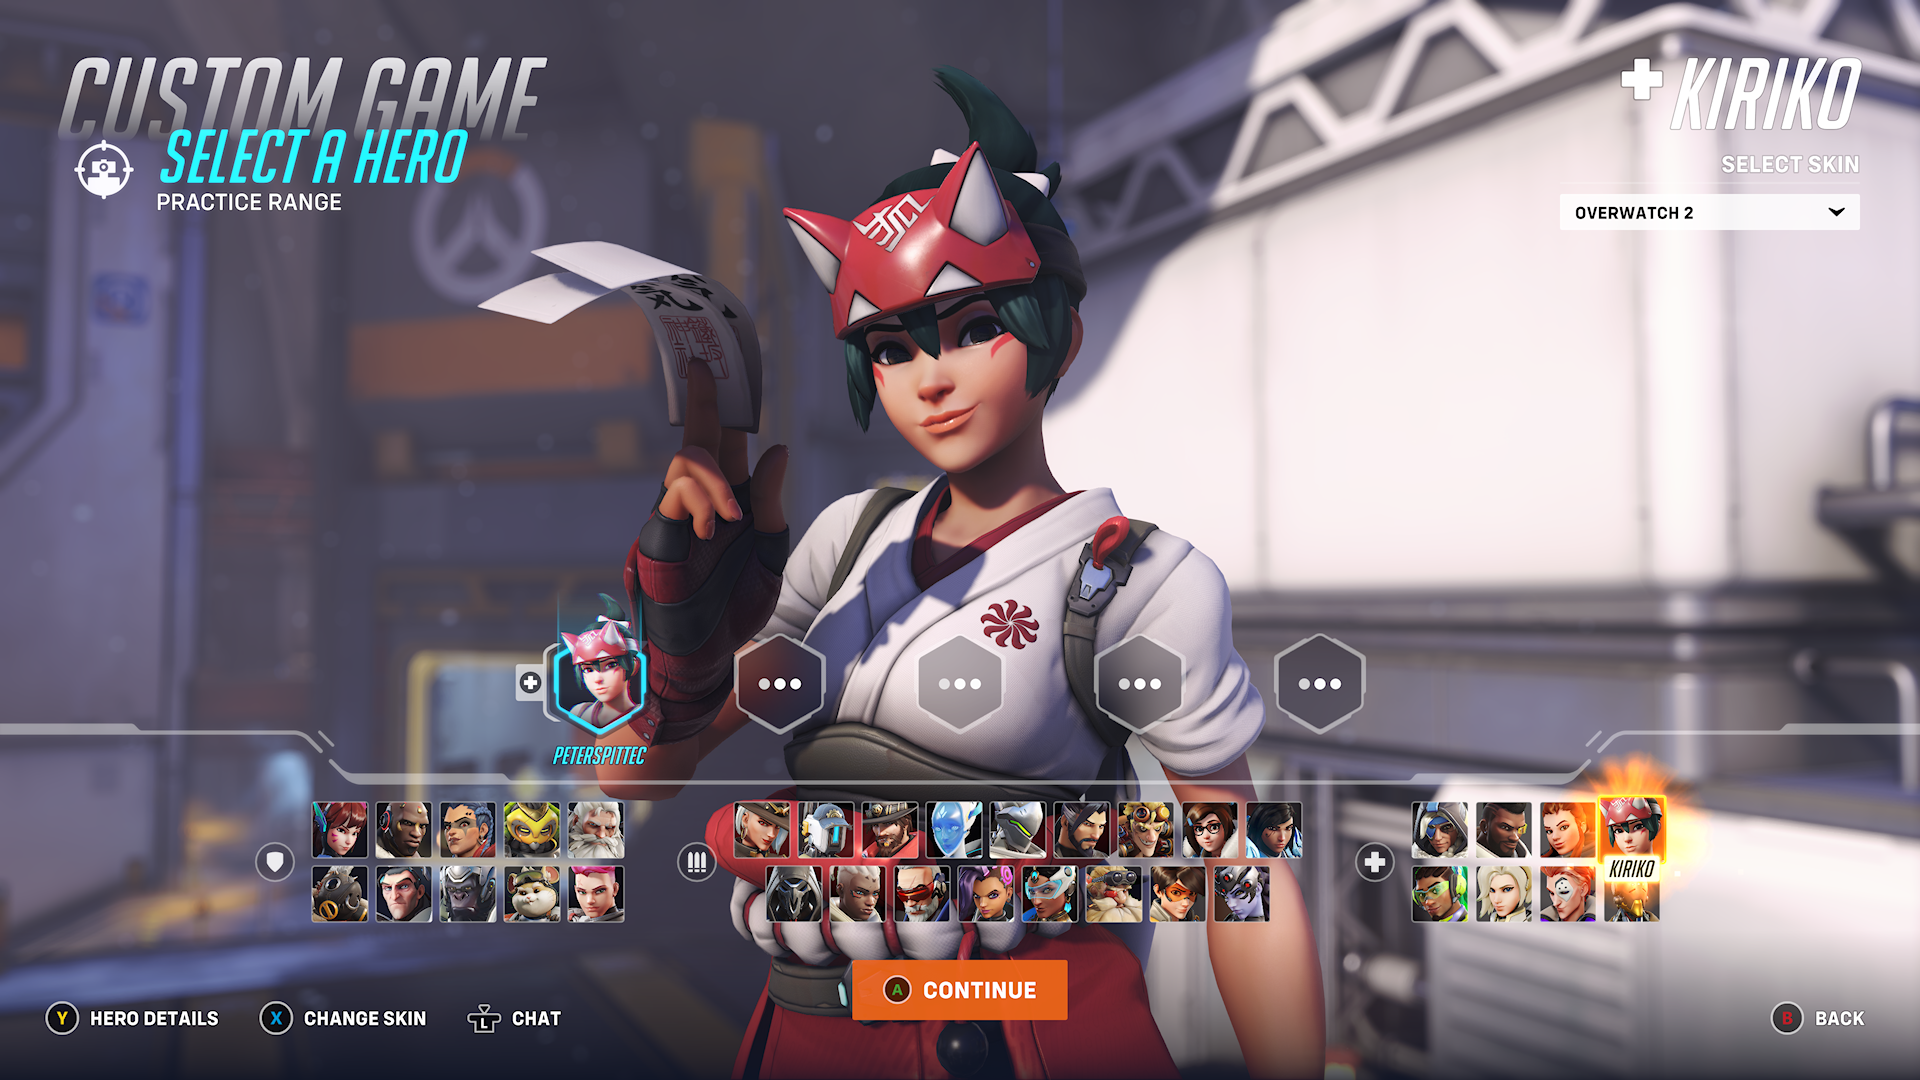 Xbox is letting Overwatch 2 players unlock new support hero right